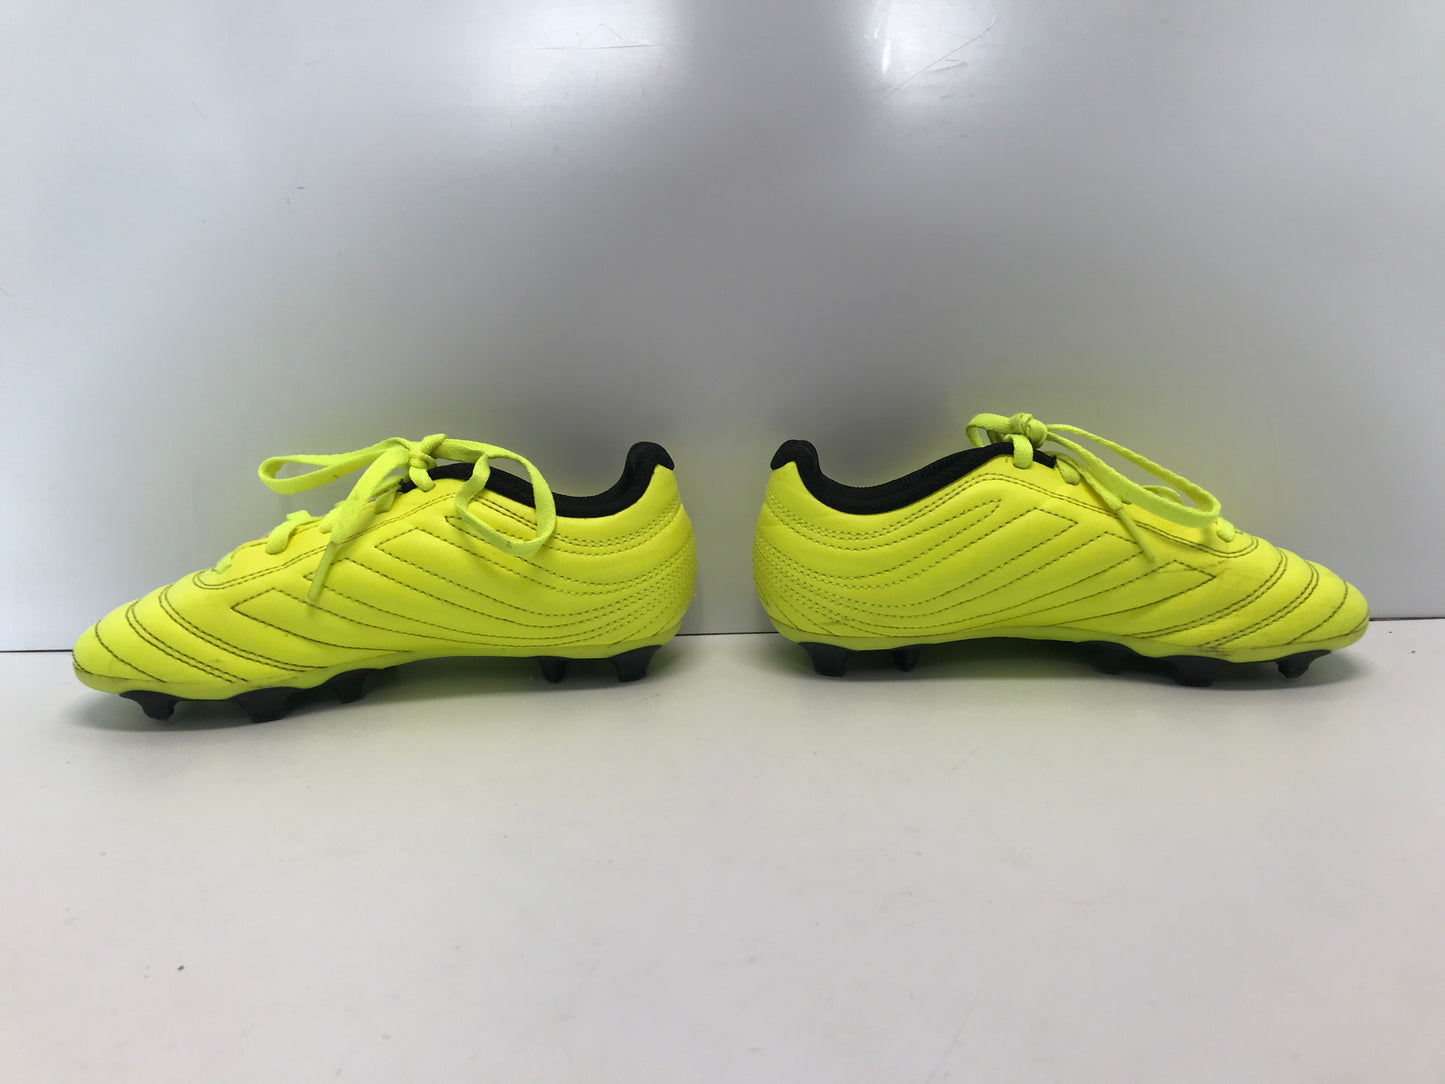 Soccer Shoes Cleats Child Size 1.5 Adidas Copa Lime Black Like New